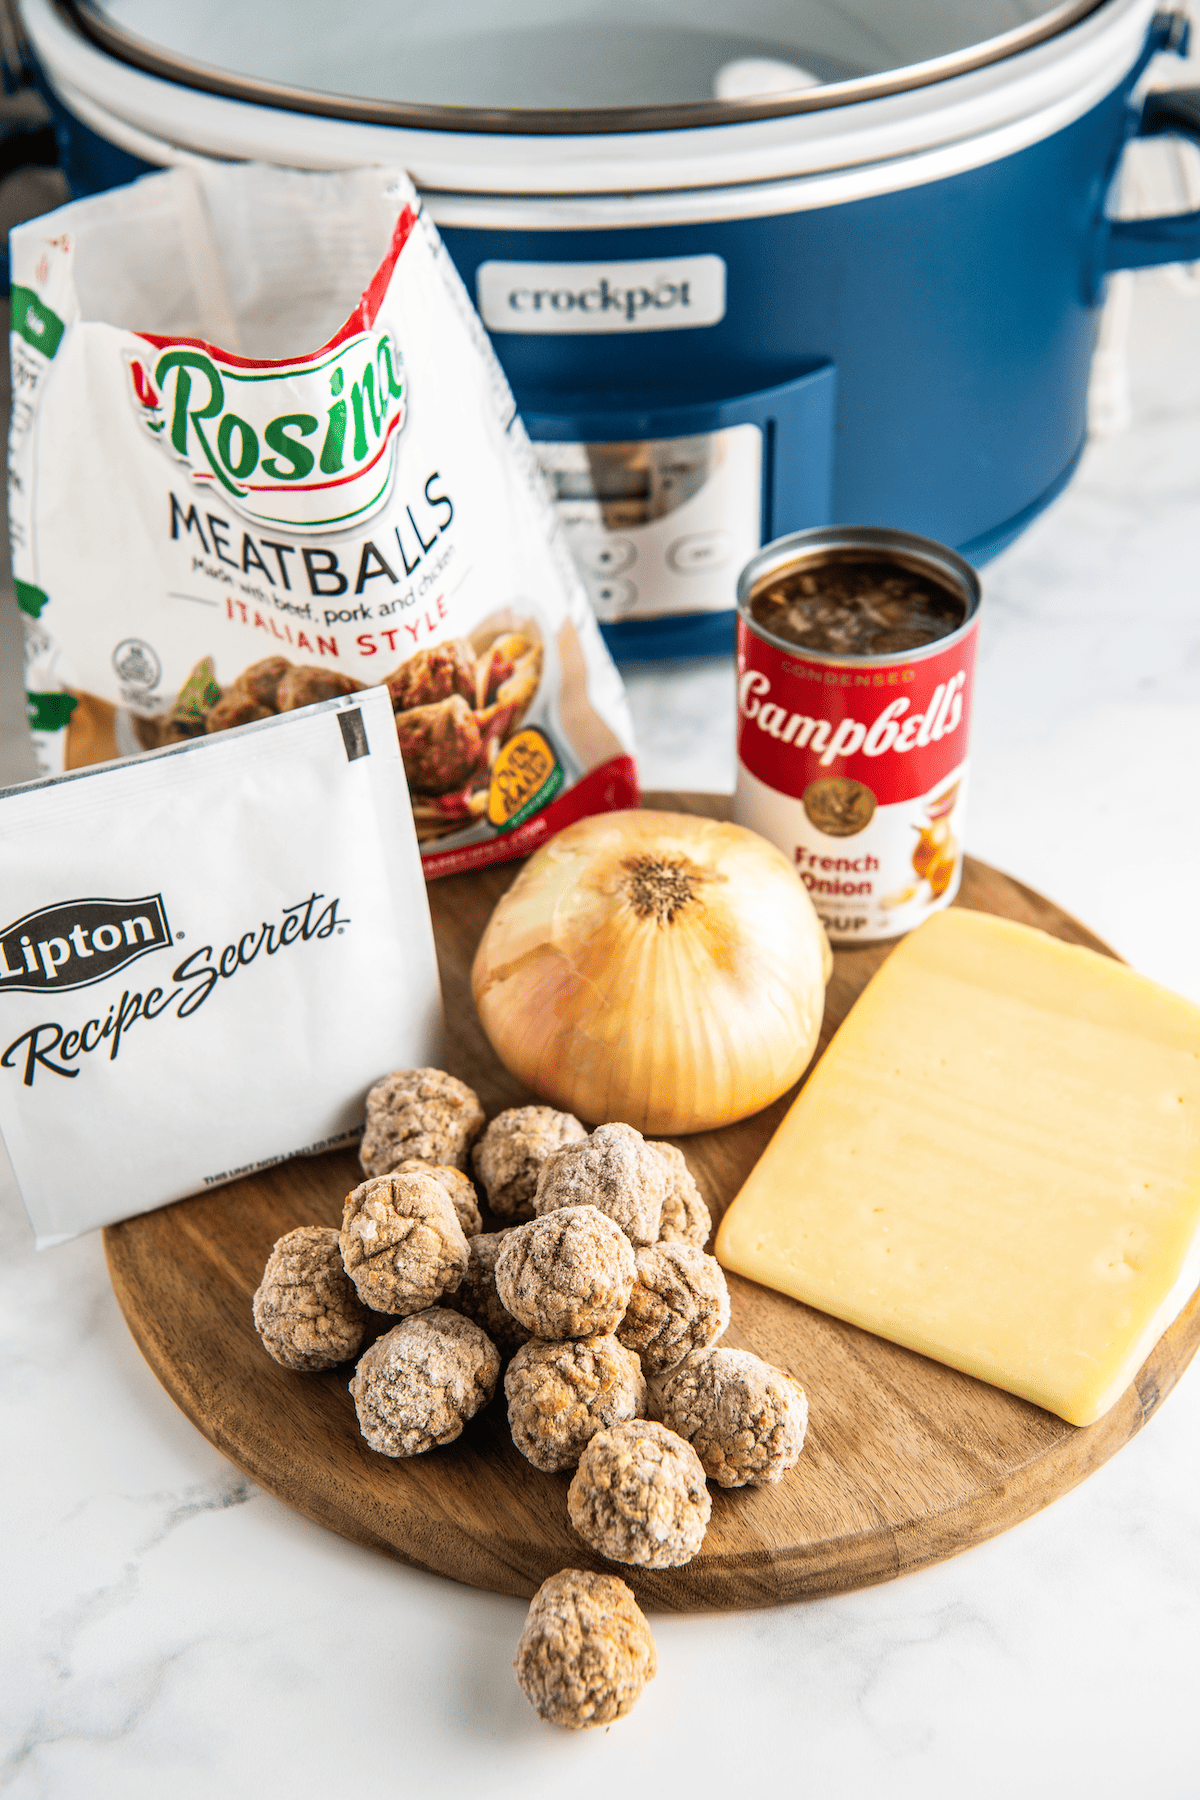 The ingredients needed for French onion meatballs: a bag of frozen meatballs, a pile of frozen meatballs, a packet of Lipton onion soup mix, a can of Campbells French onion soup, a yellow onion, and a block of gruyere cheese, in front of a crockpot